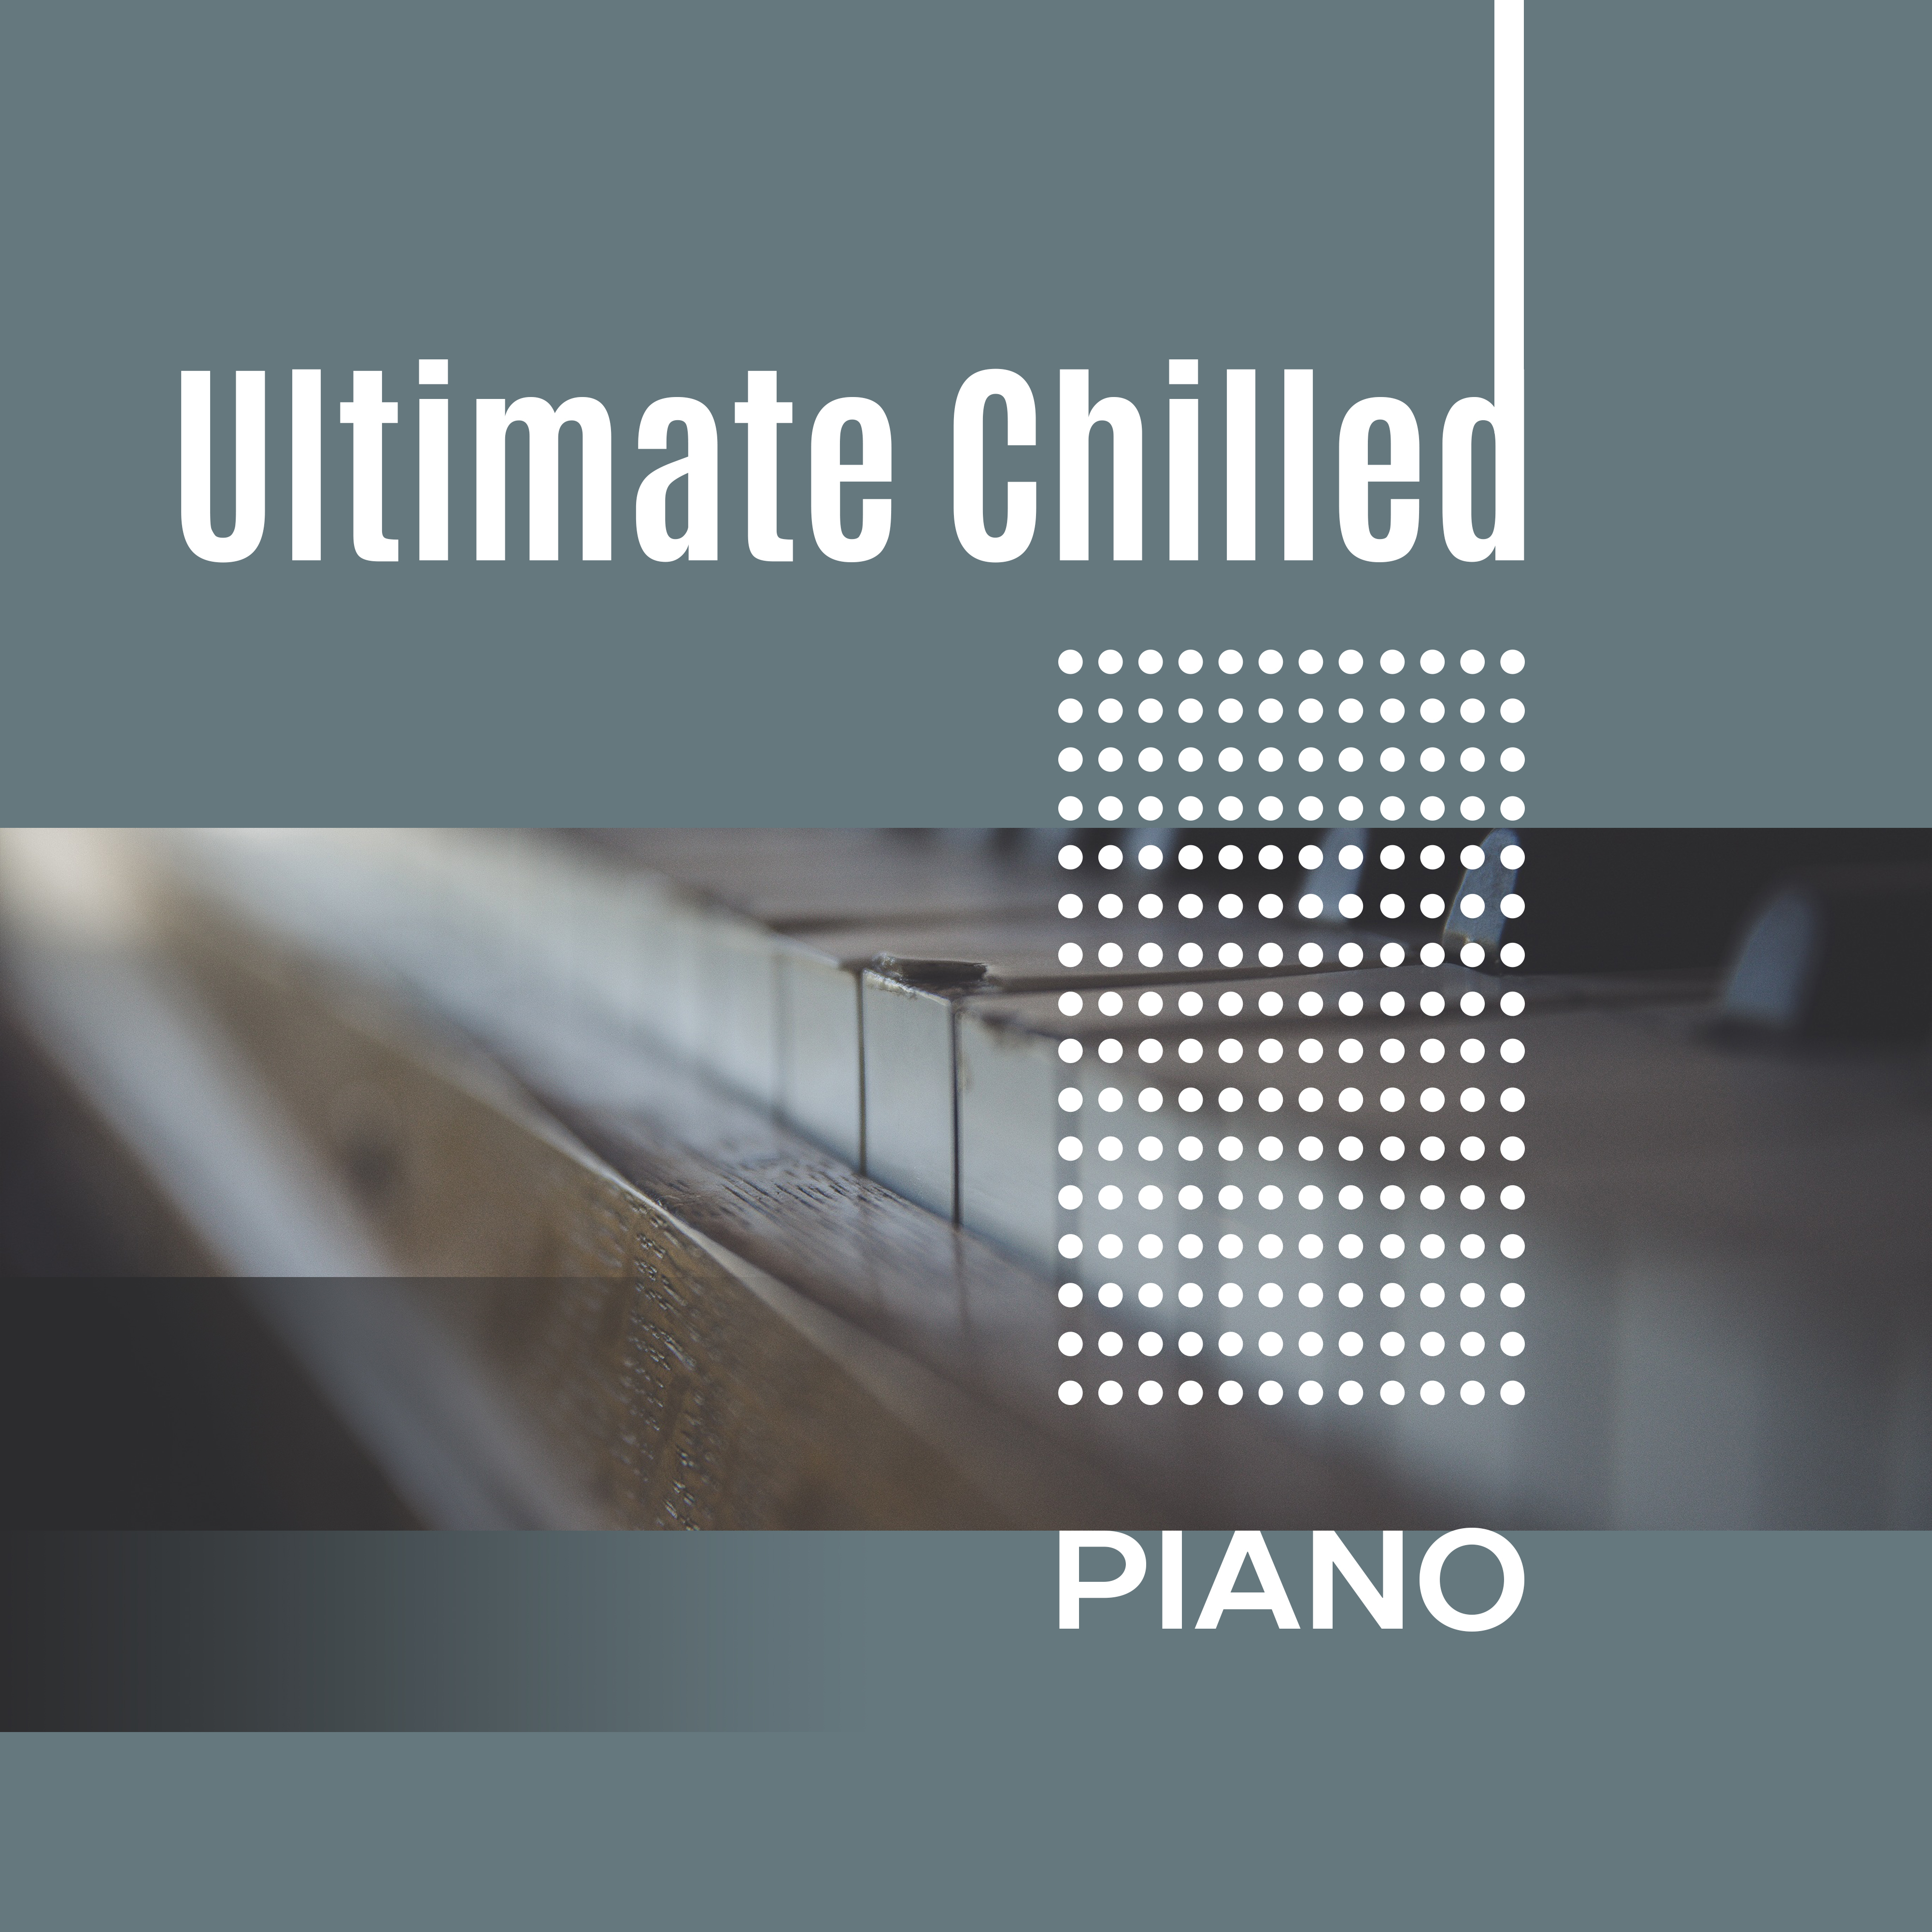 Ultimate Chilled Piano – Instrumental Music, Smooth Jazz, Ambient, Simple Piano, Ultimate Jazz